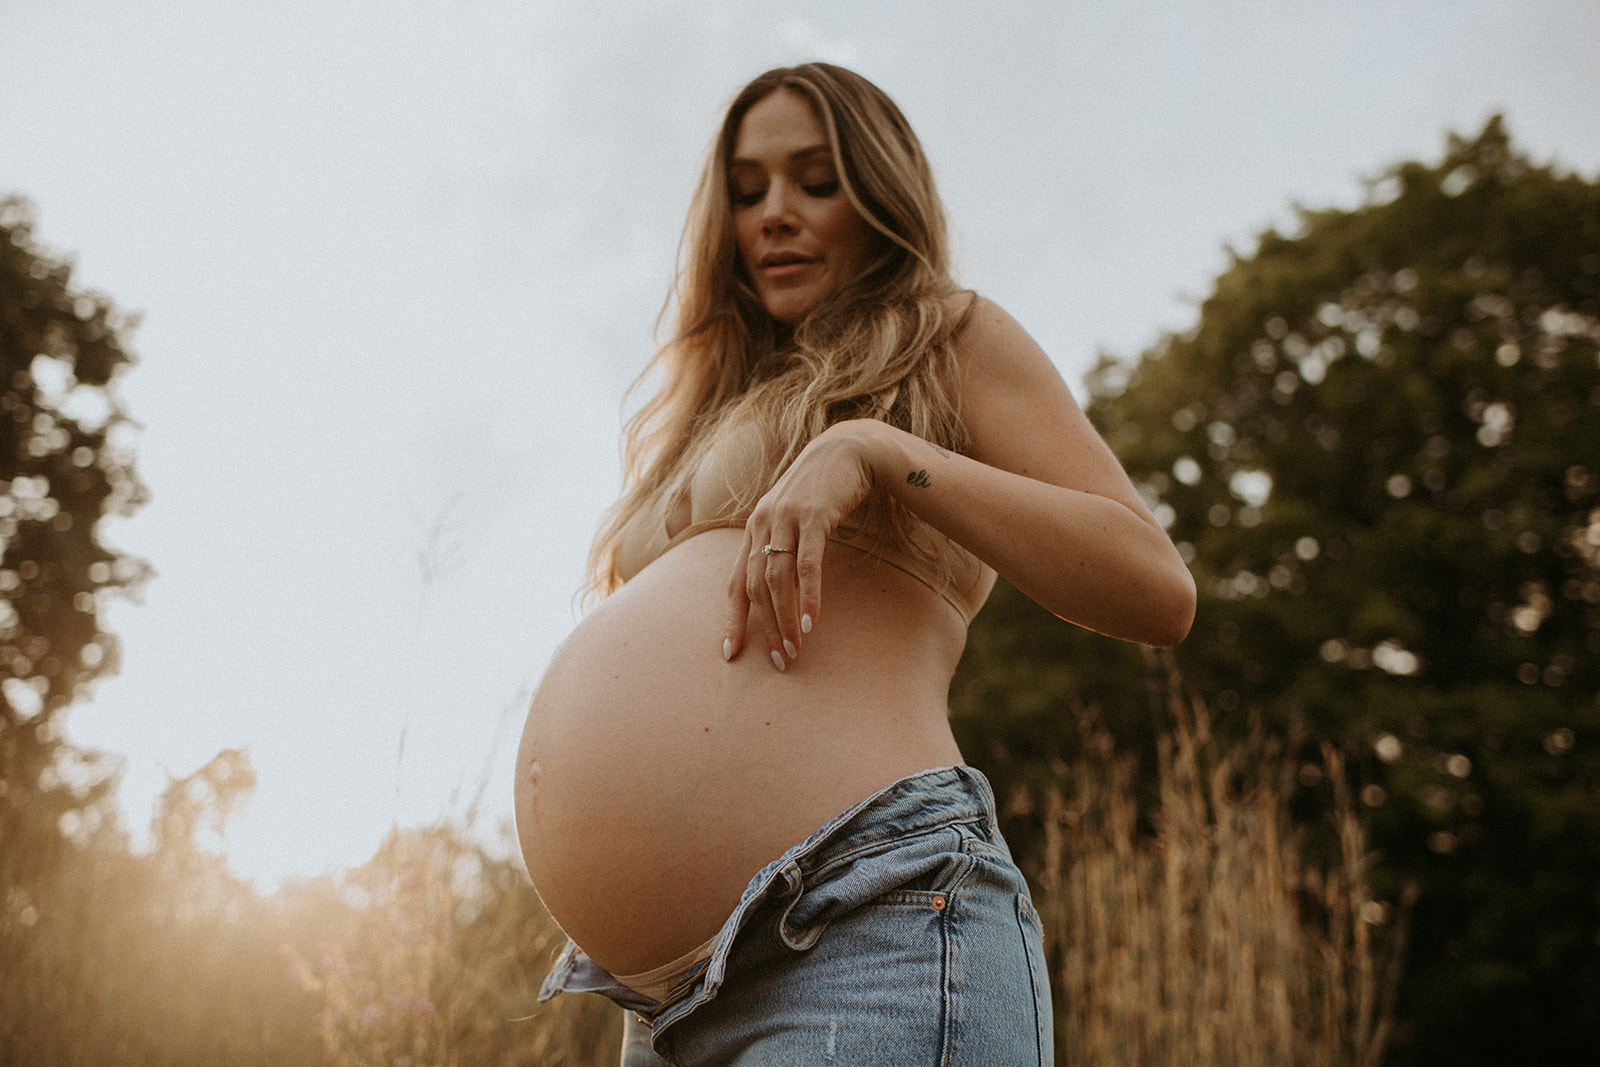 Beautiful mom-to-be poses for maternity photos in unbuttoned jeanse